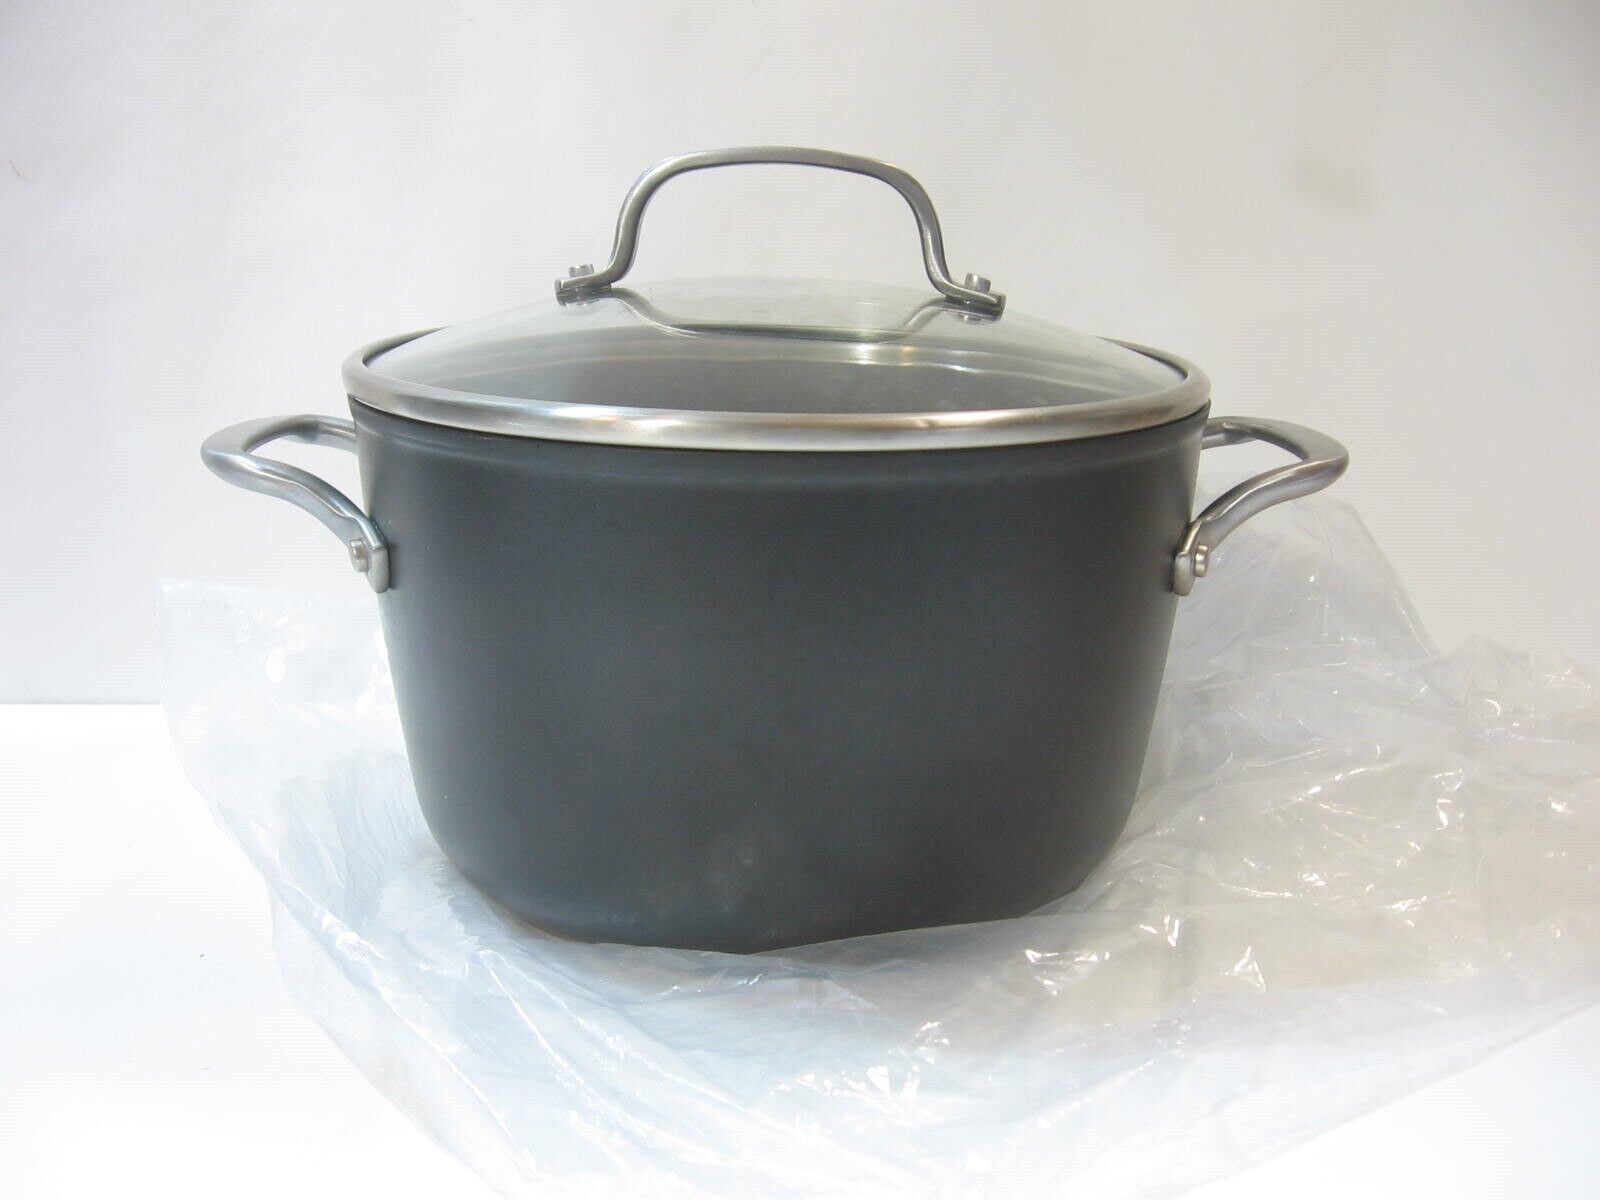 Primary image for KITCHENAID 6QT STOCK POT w/GLASS LID - Hard Anodized Nonstick Induction Safe